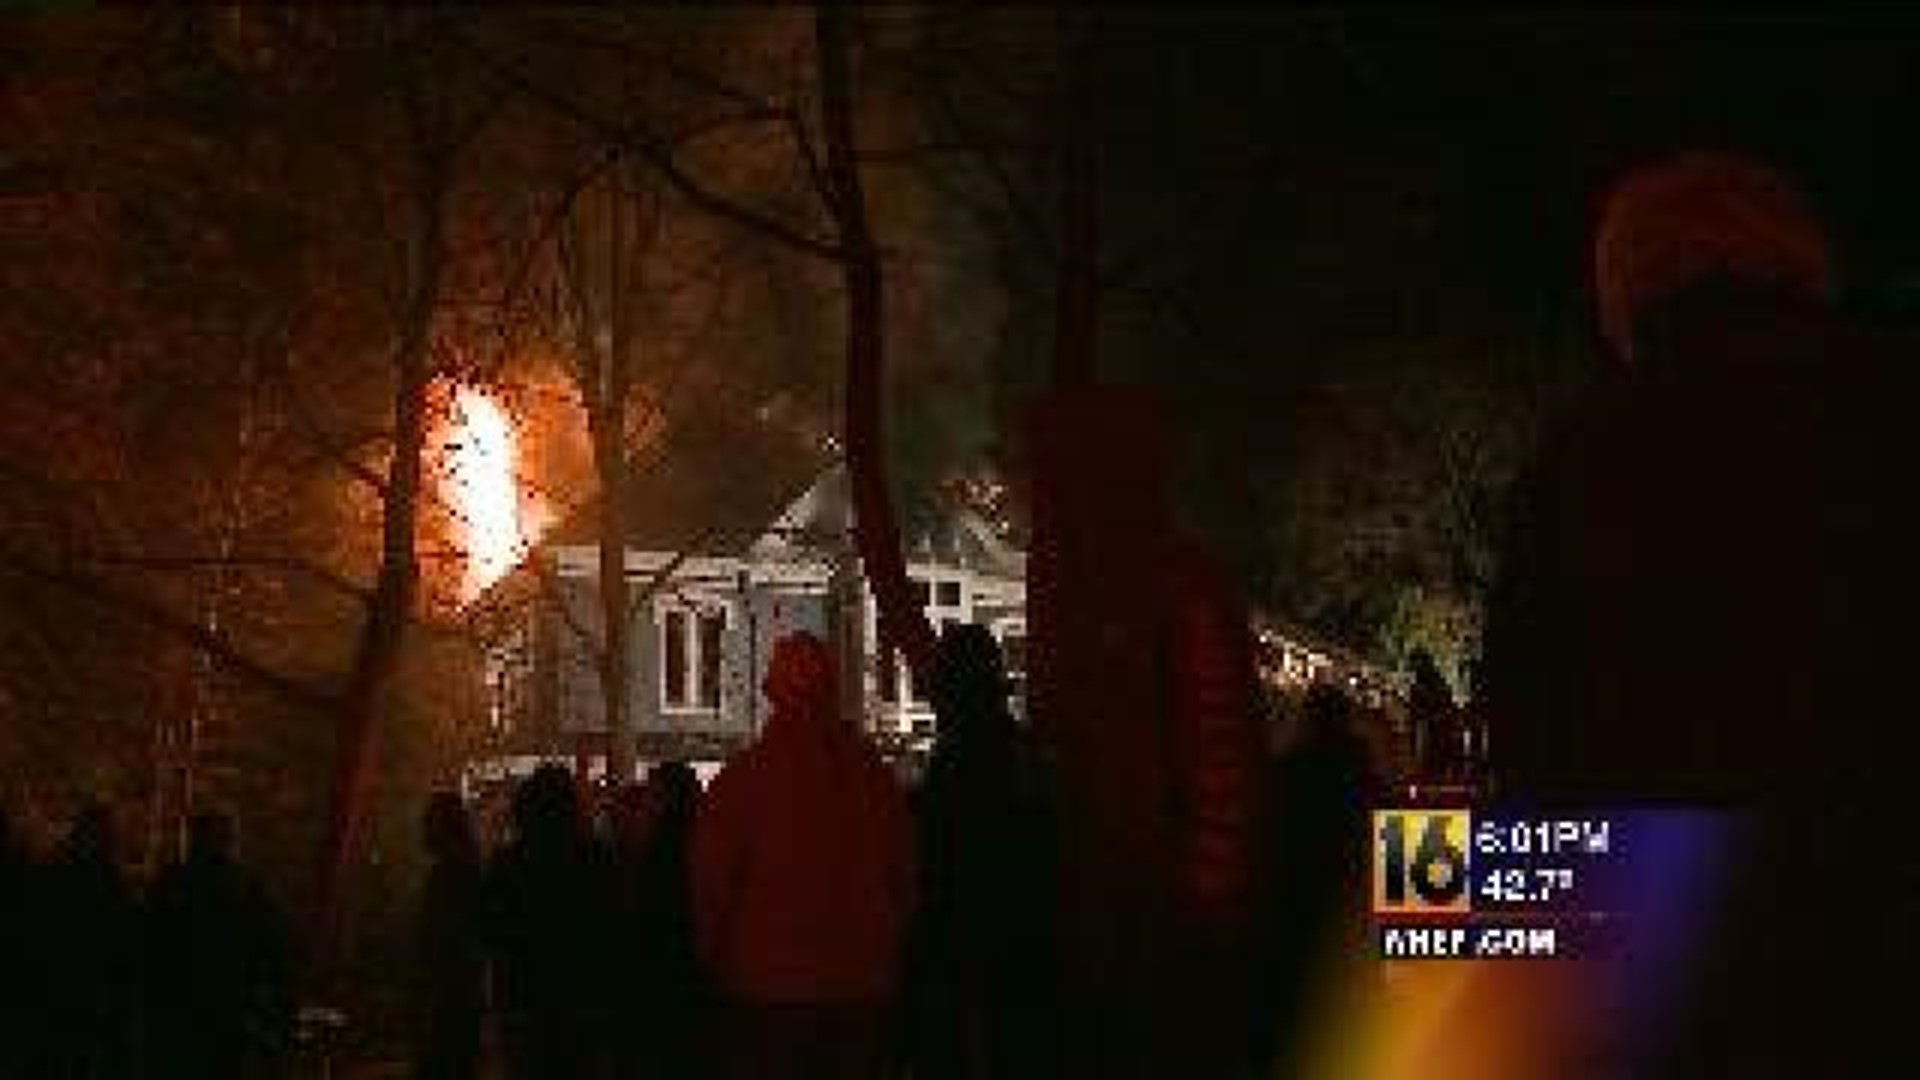 Two More Luzerne County Fires Ruled Arson